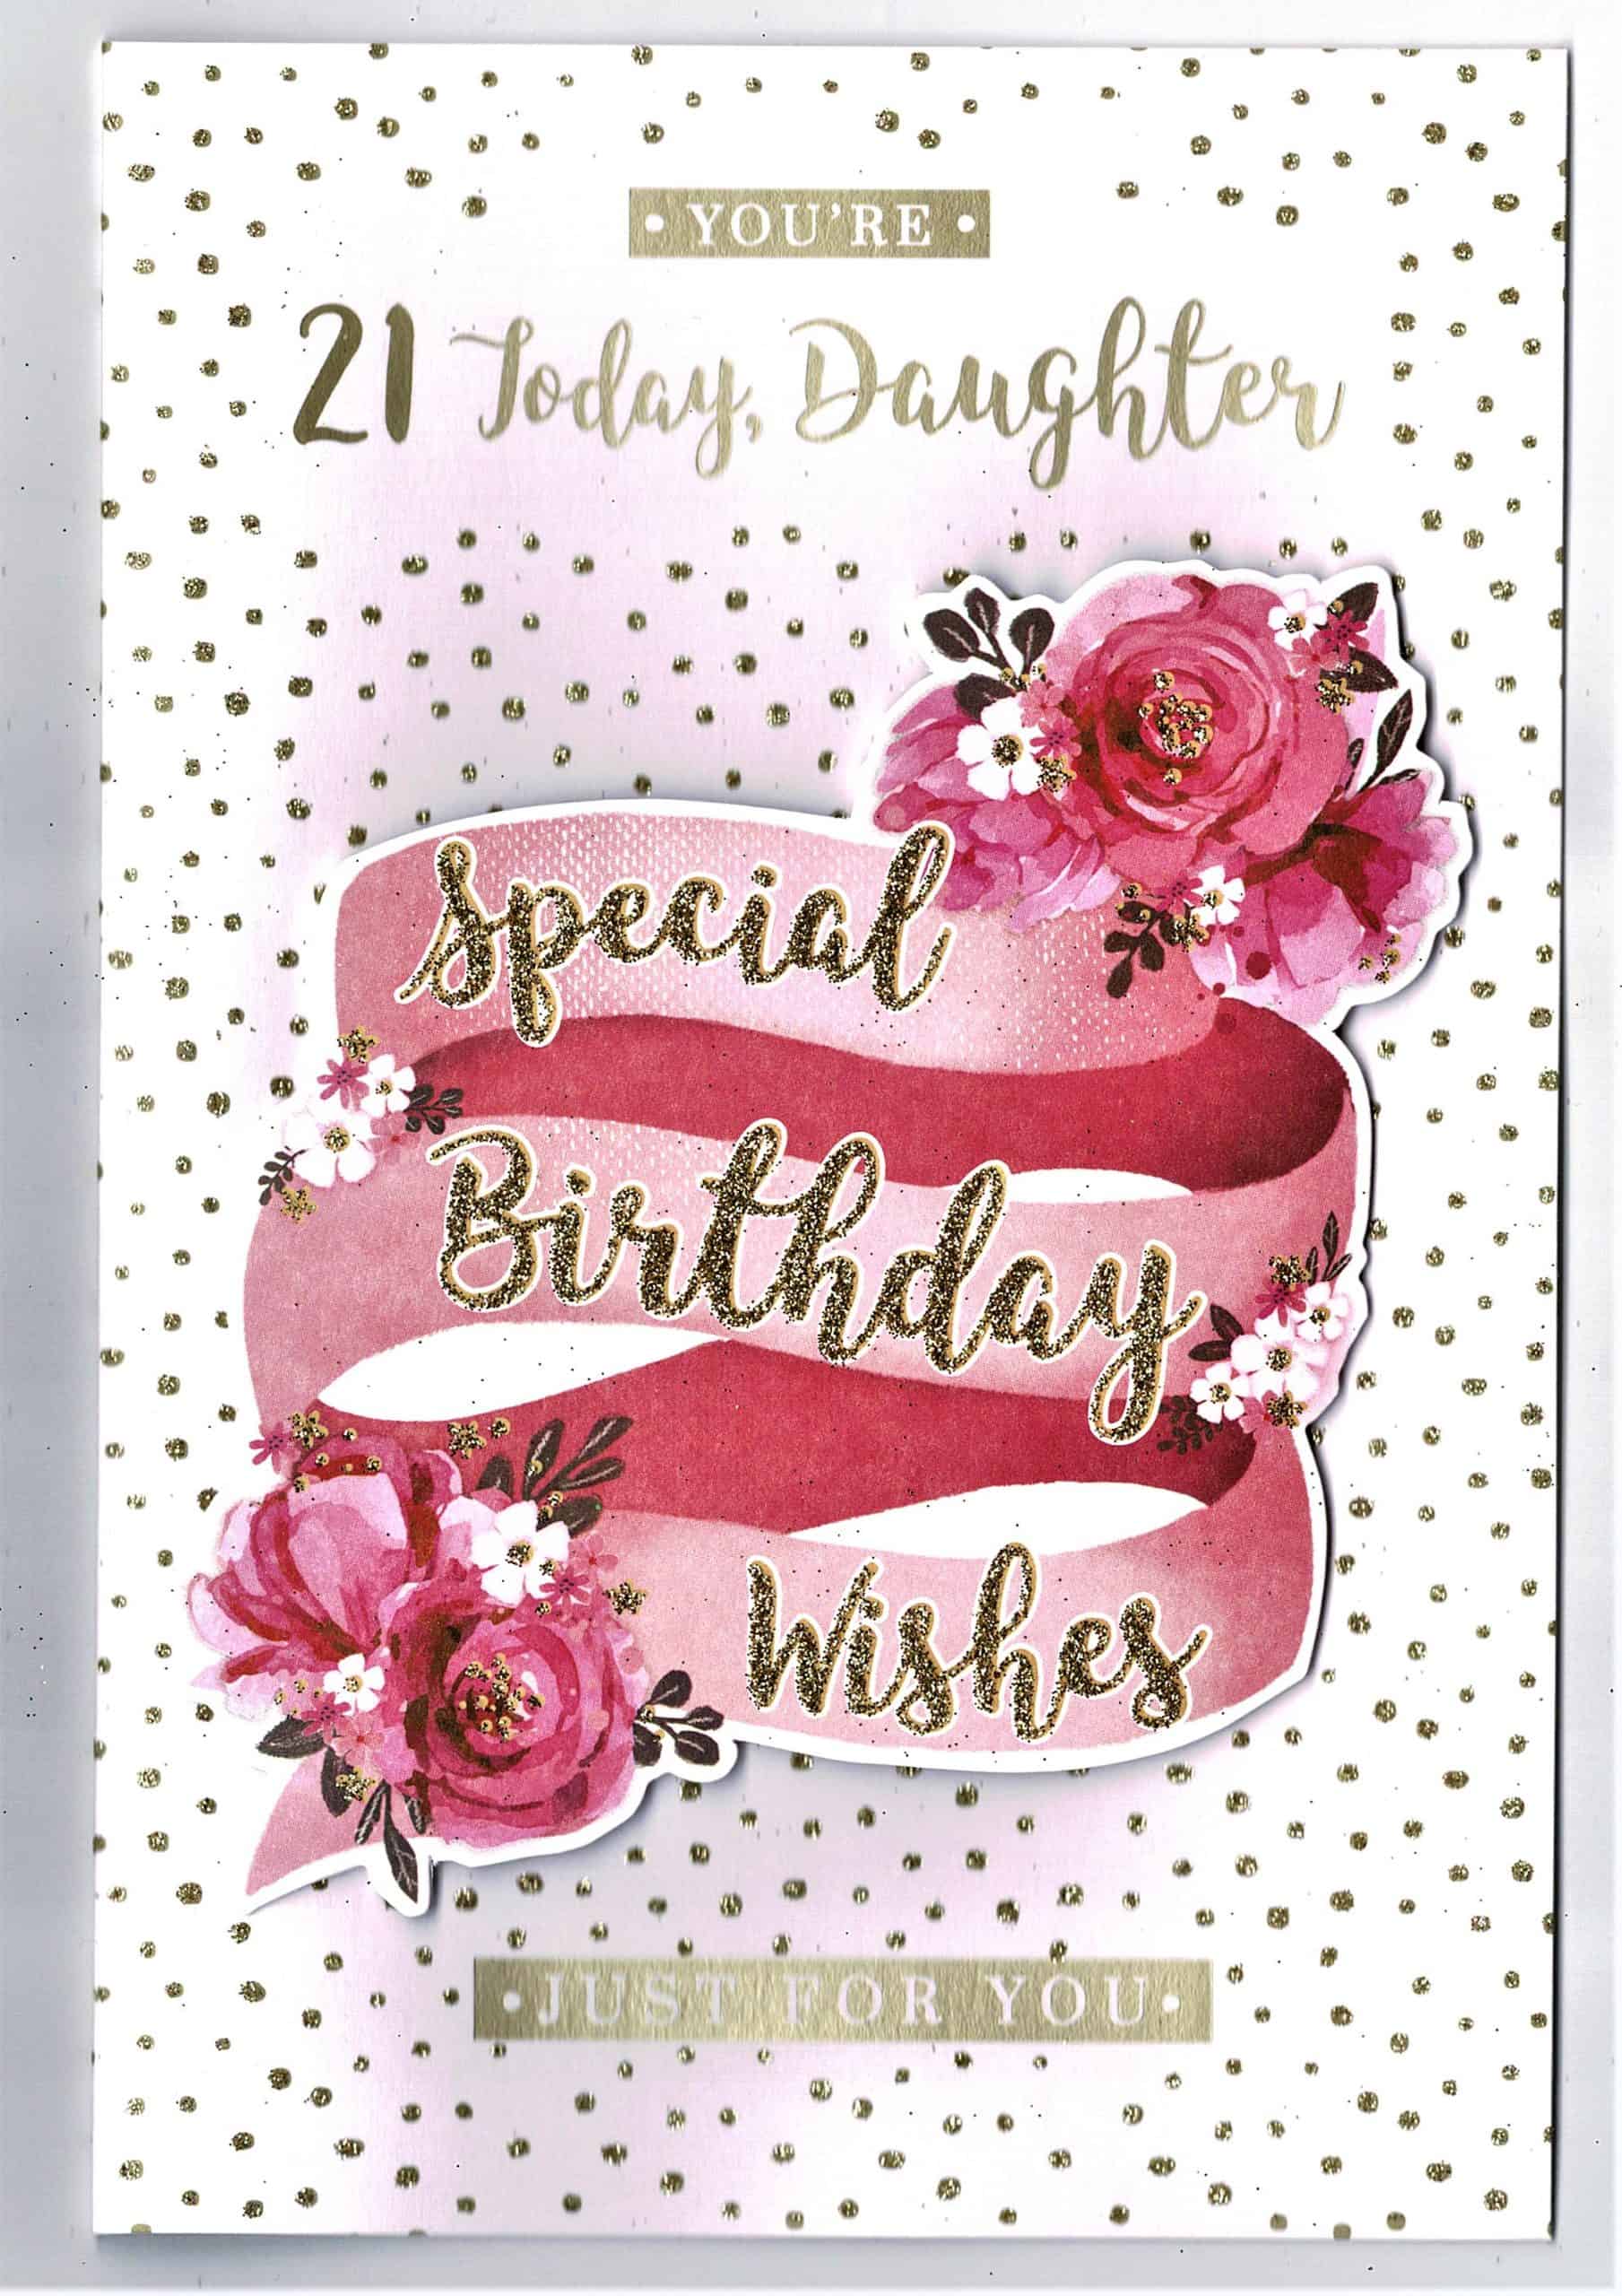 daughter-21st-birthday-you-re-21-today-daughter-glitter-embossed-design-with-love-gifts-cards